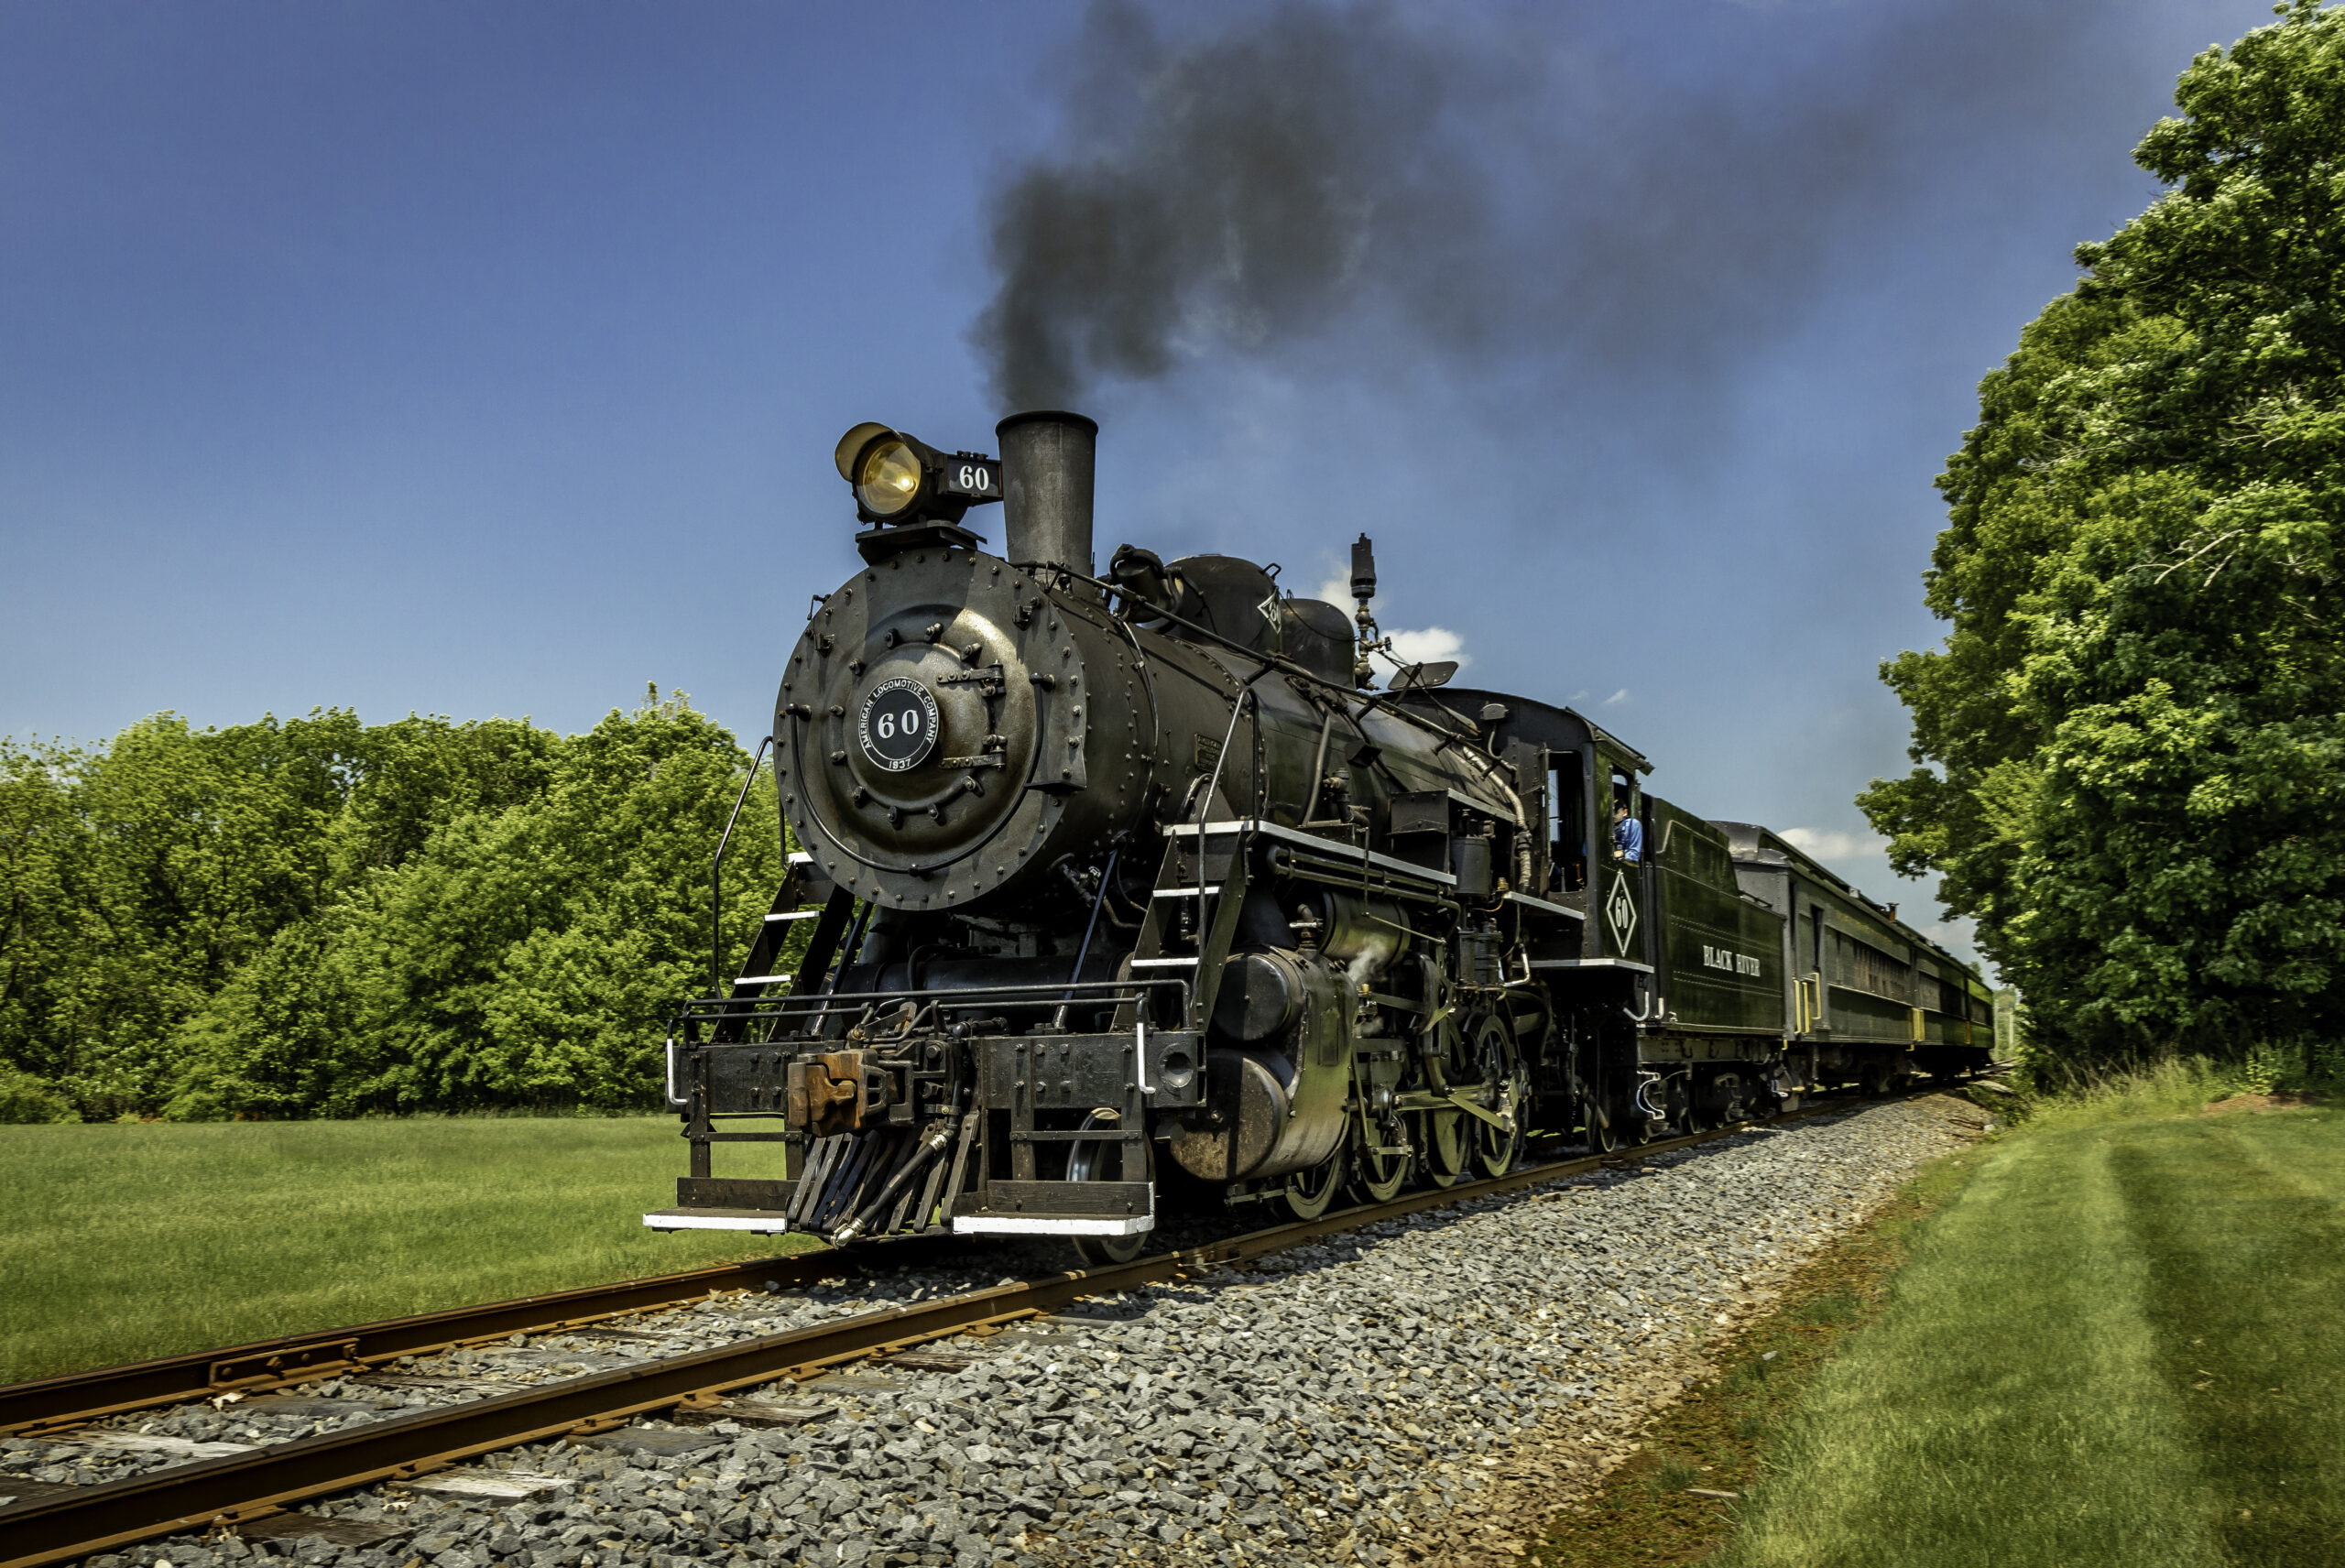 Come and See what everyone loves in Flemington - Black River and Western Railroad